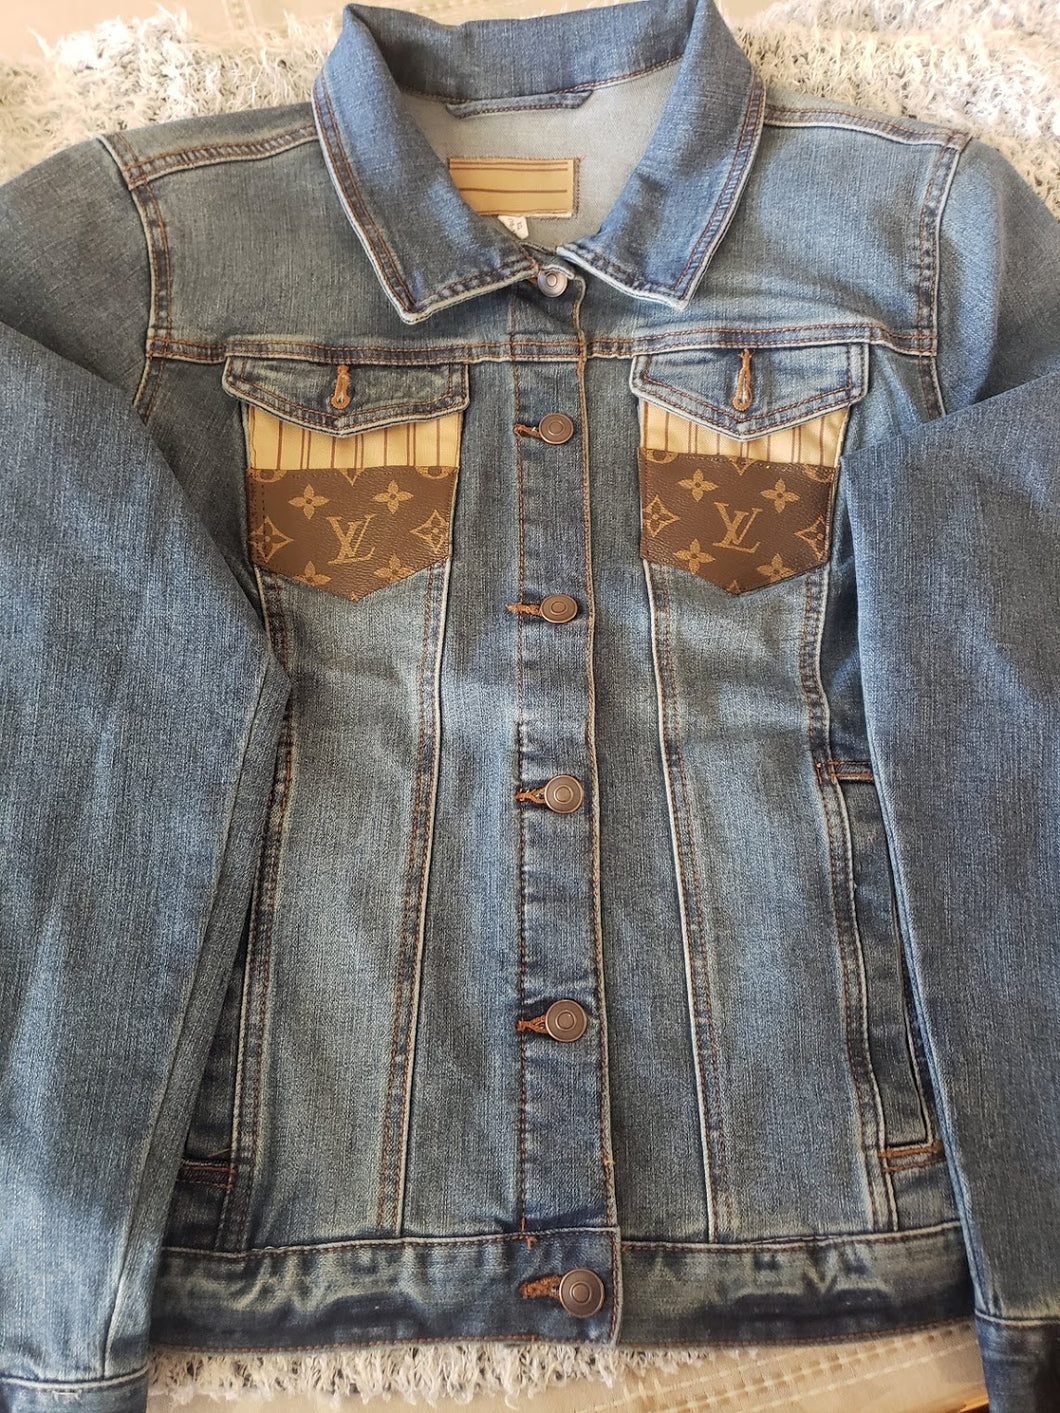 Upcycled Louis Vuitton Jean Jacket Blue Size 00 - $60 (69% Off